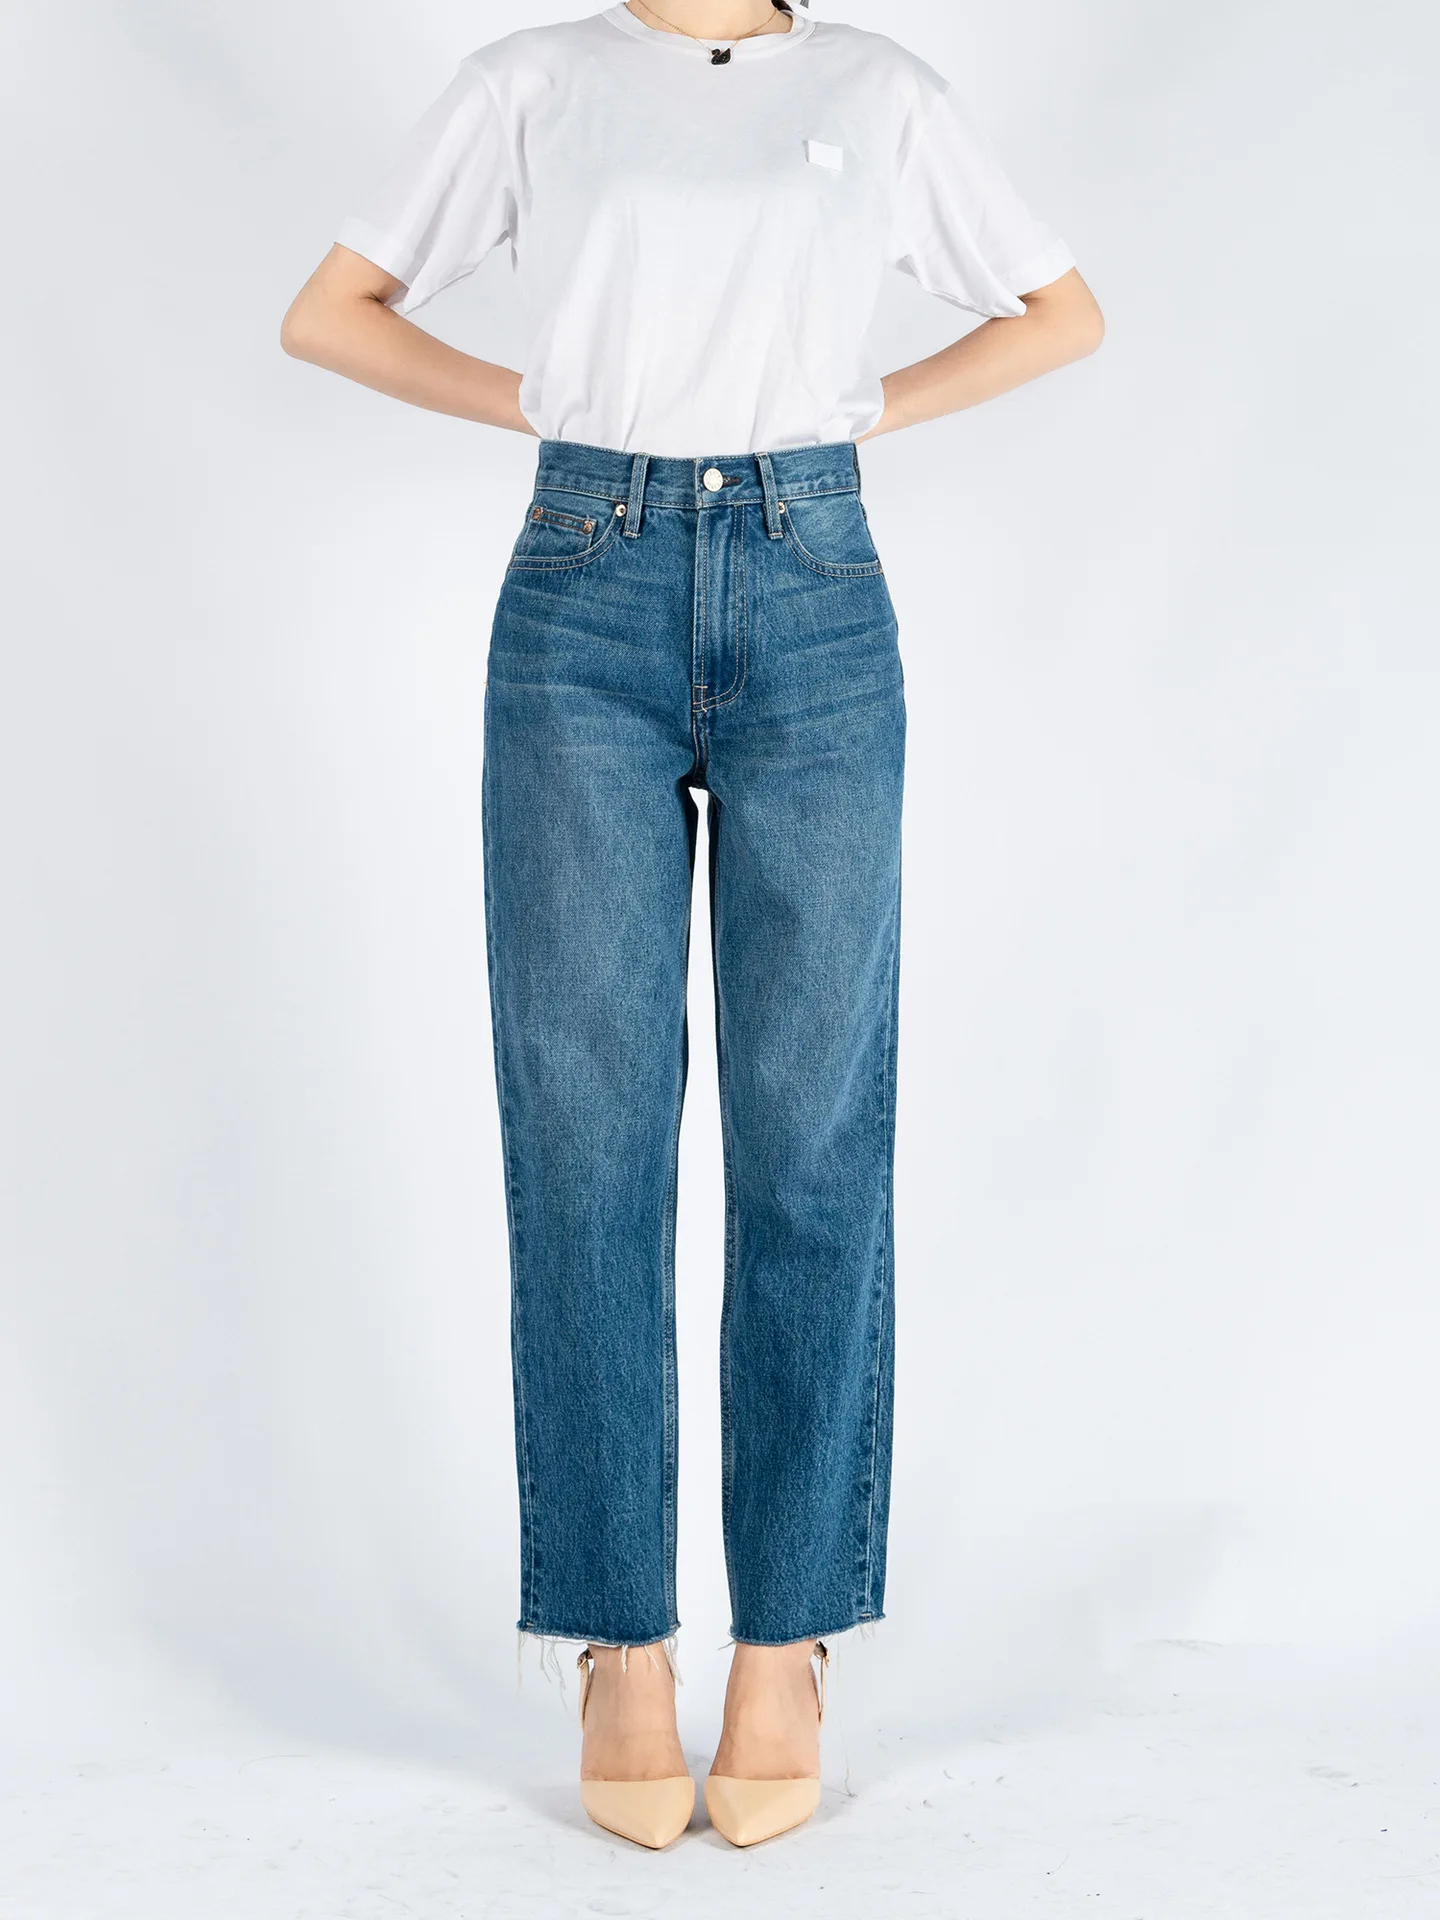 gap jeans Women Jeans Pants 2021 Spring/Summer High Waist Retro Washed Blue Straight Calf Top Line Decorated Raw Edge Nine-point Jeans levis 501